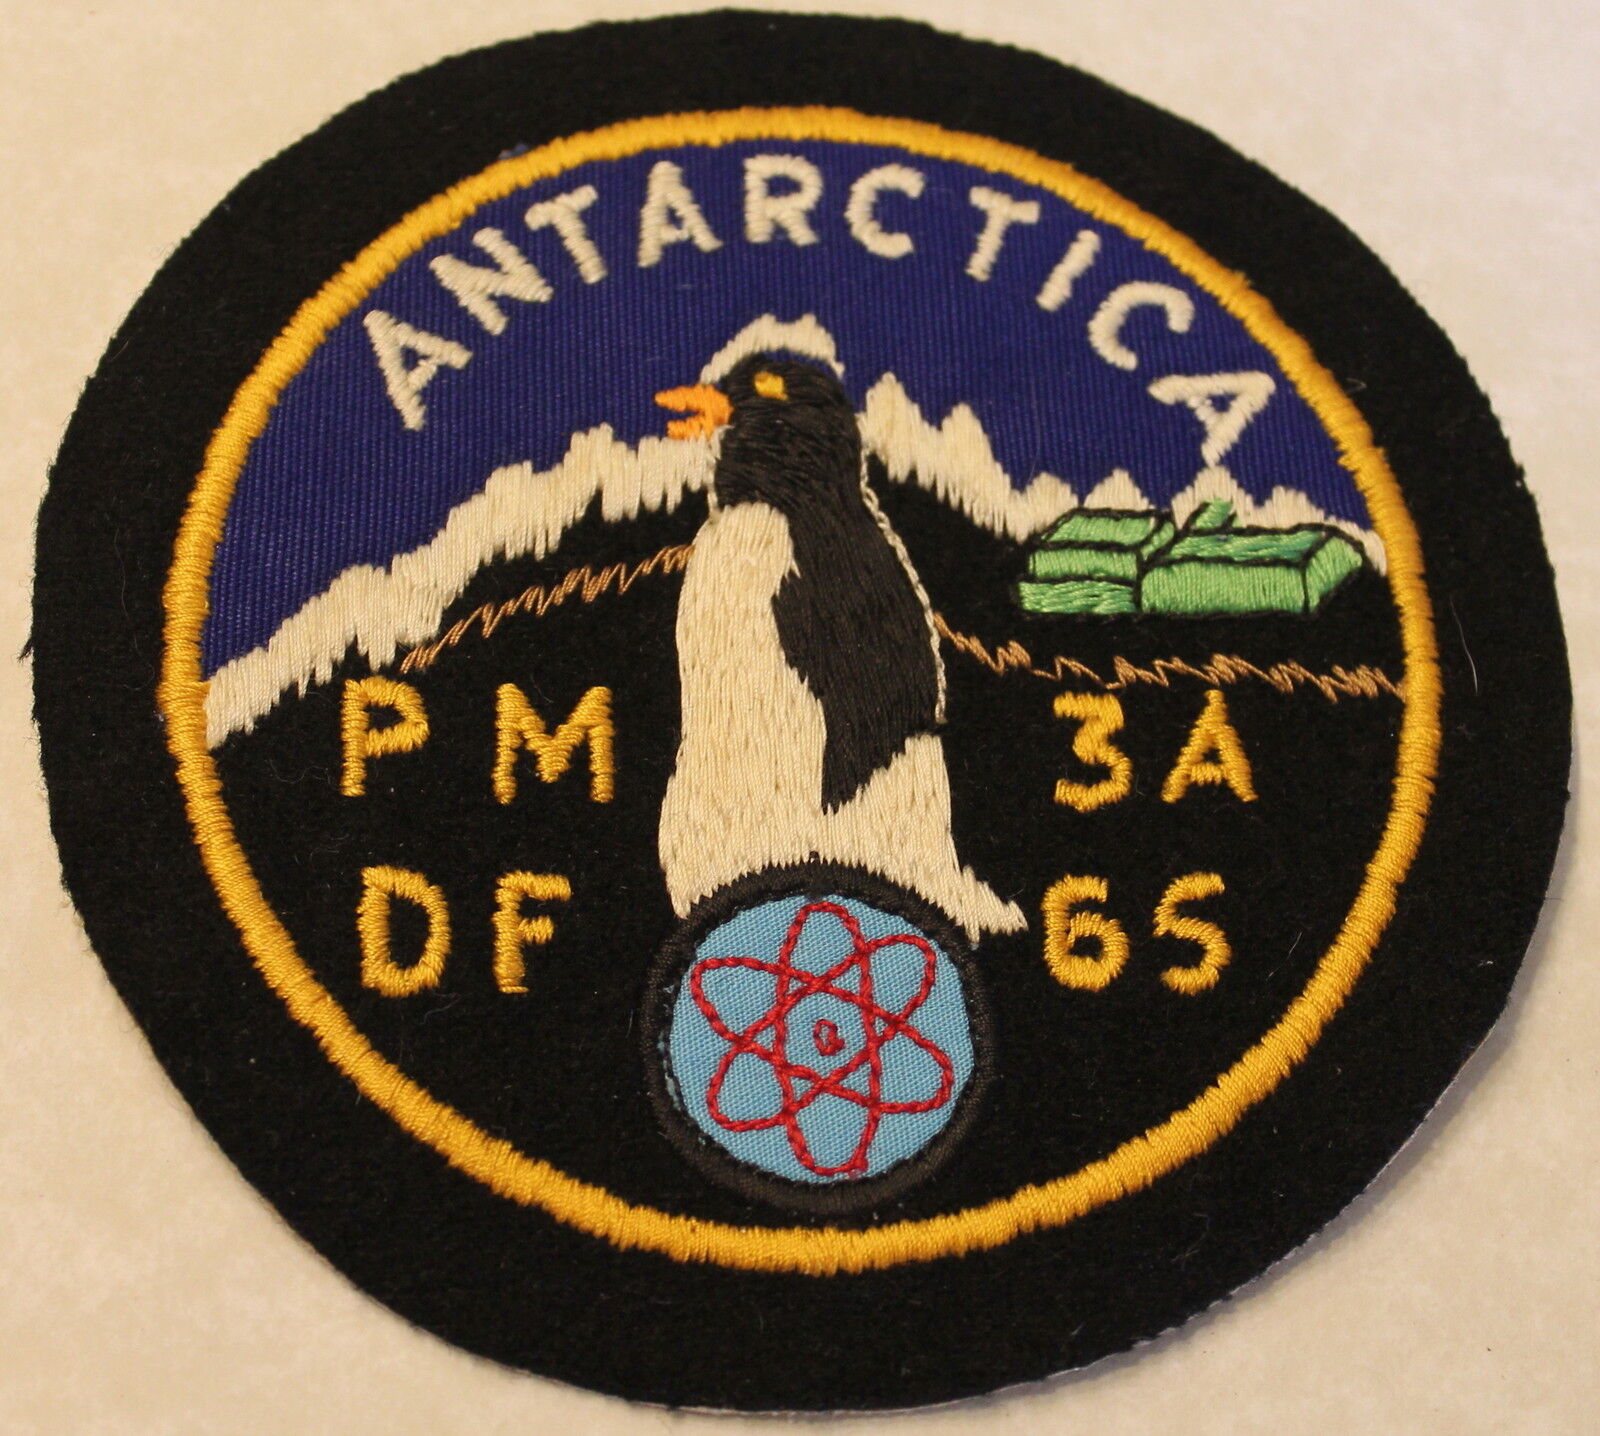 Antarctica PM-3A Nuclear Power Plant Op Deep Freeze DF 65 Navy Patch / Seabees